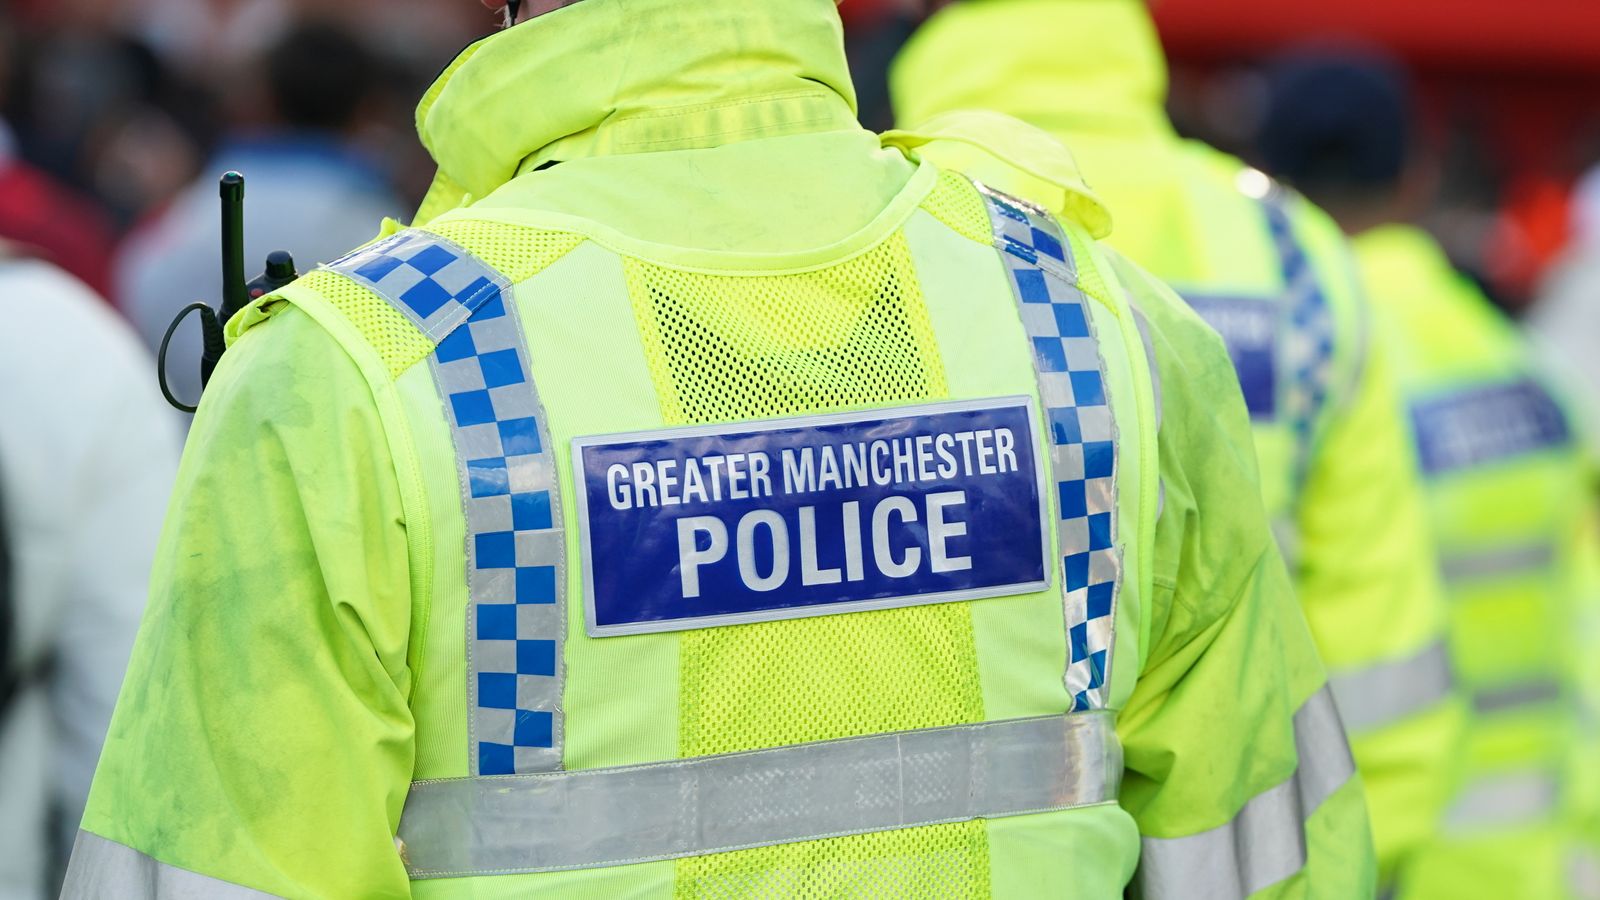 Rochdale: Four boys aged between 12 and 14 arrested on suspicion of rape